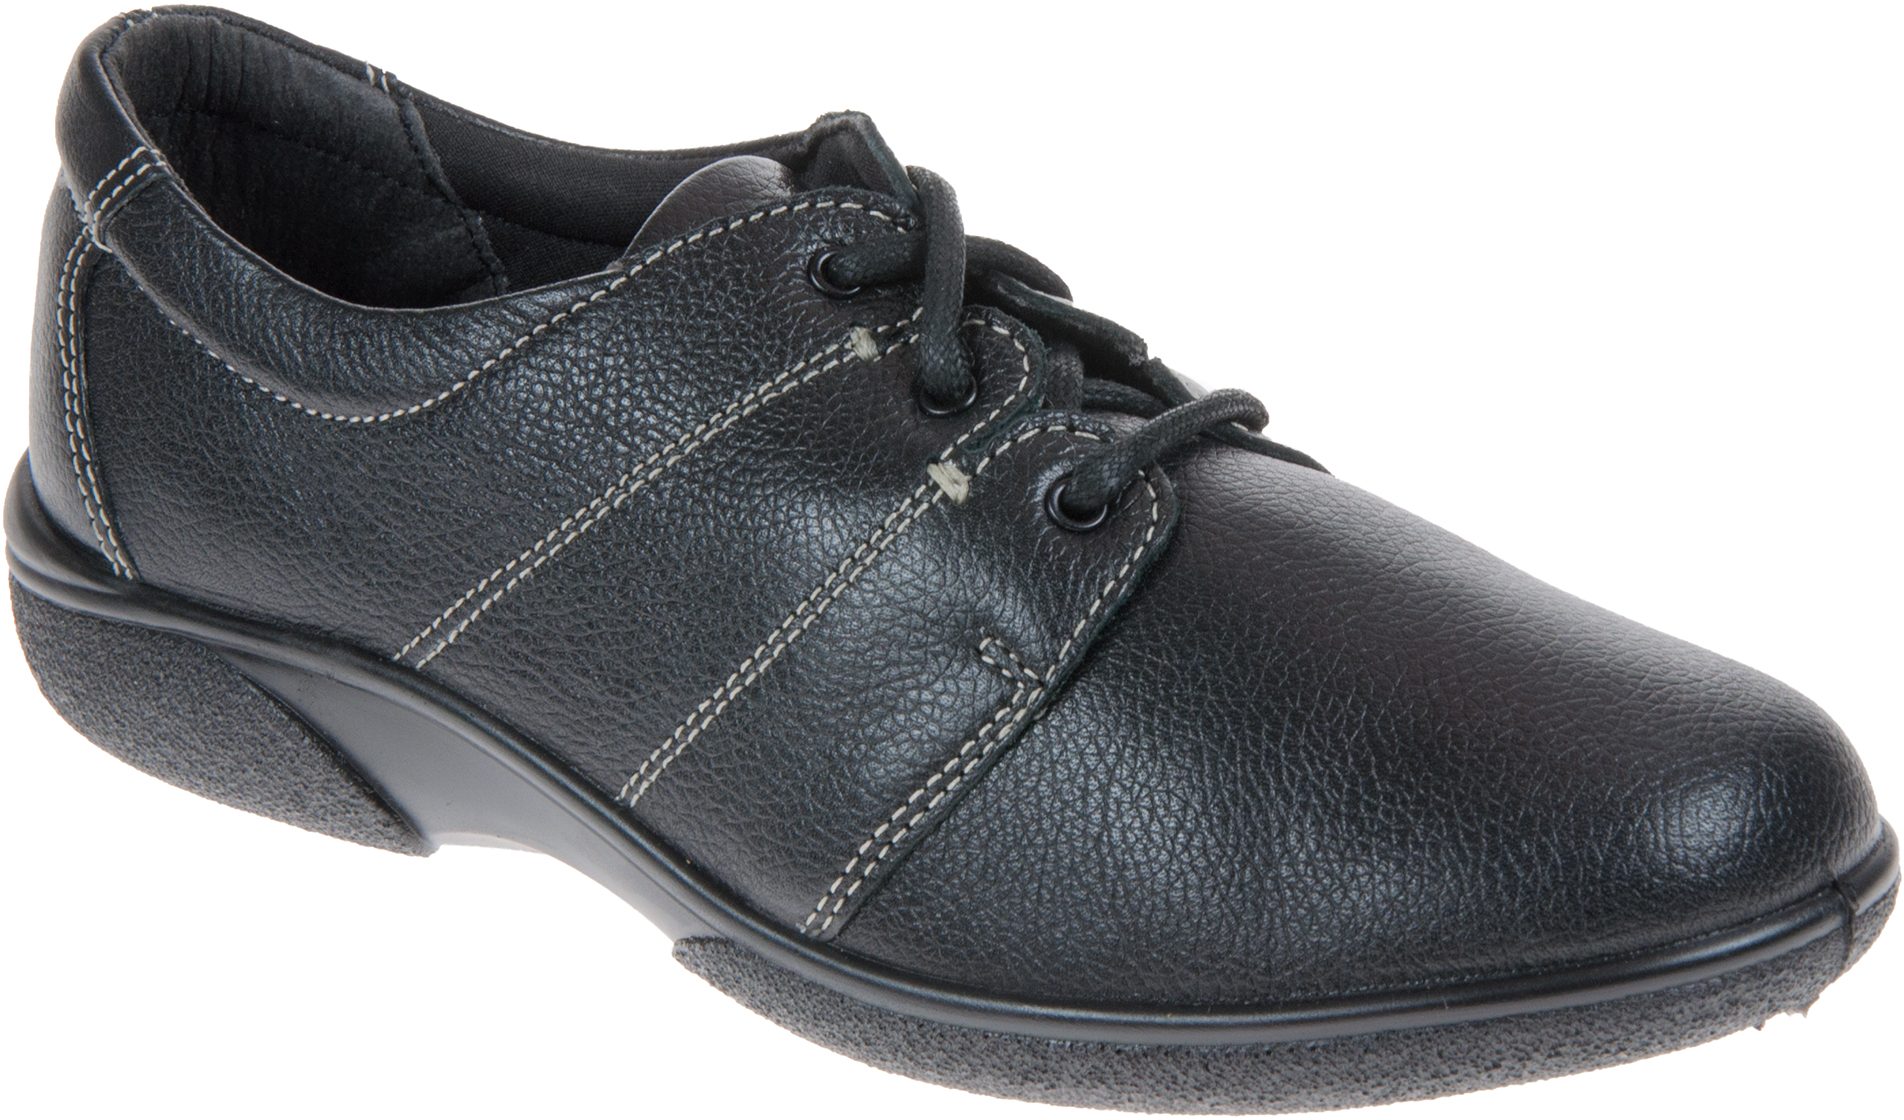 DB Easy B Shoes Glossop Black 78309A - Everyday Shoes - Humphries Shoes